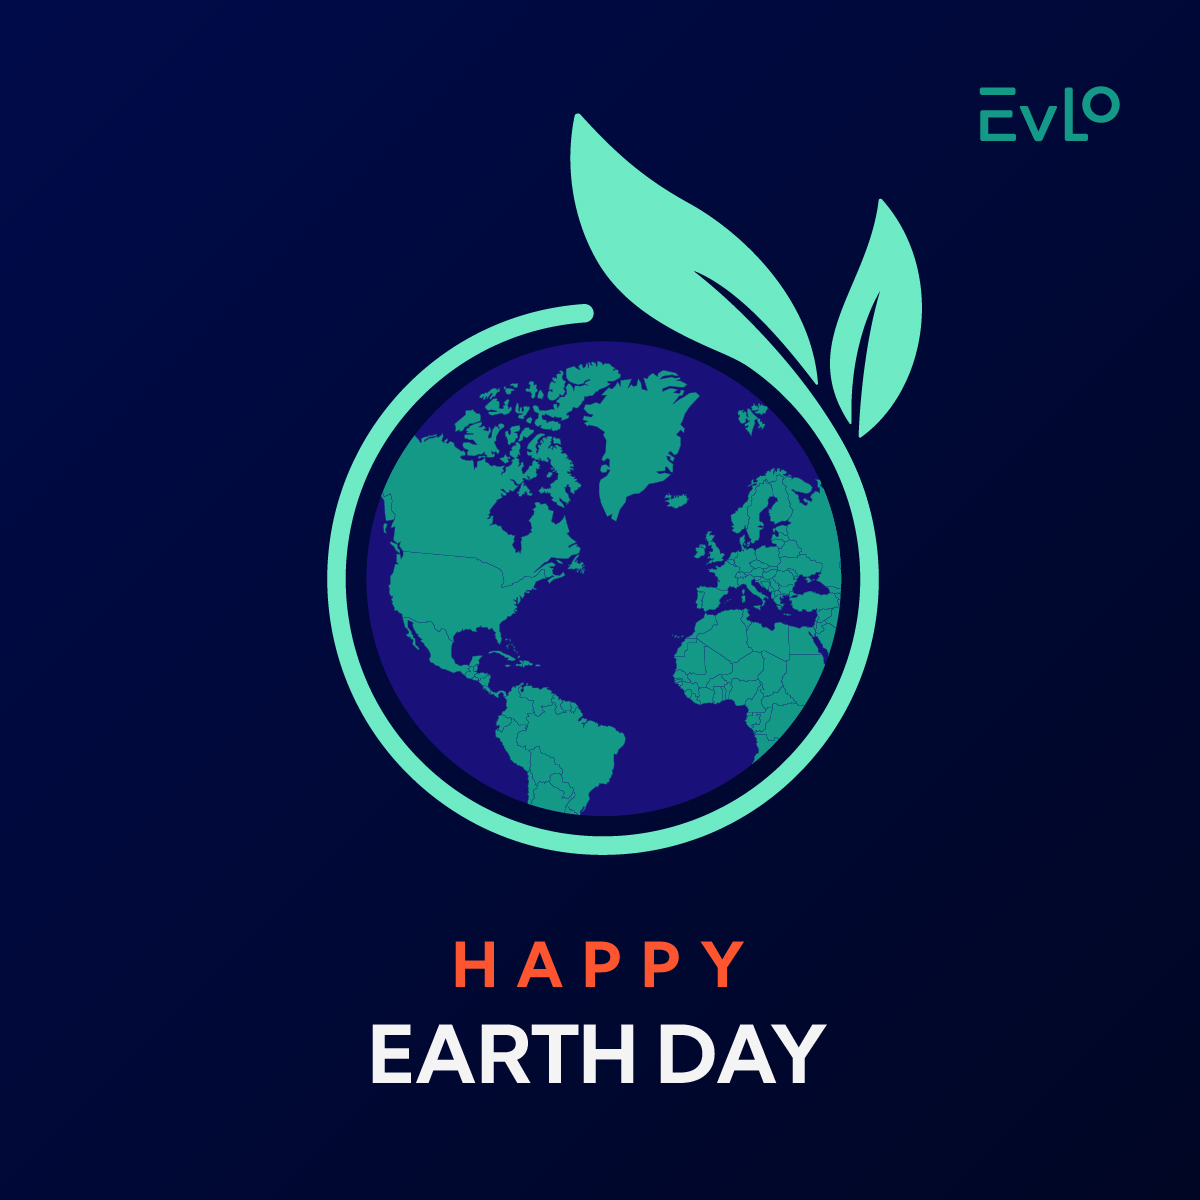 On this #EarthDay, our team is proud to contribute to a cleaner energy future and to accelerate the energy transition with safe, reliable, and efficient storage systems.
Happy #EarthDay!

#EnergyStorage #SustainableSolutions #CleanEnergy #RenewableEnergy